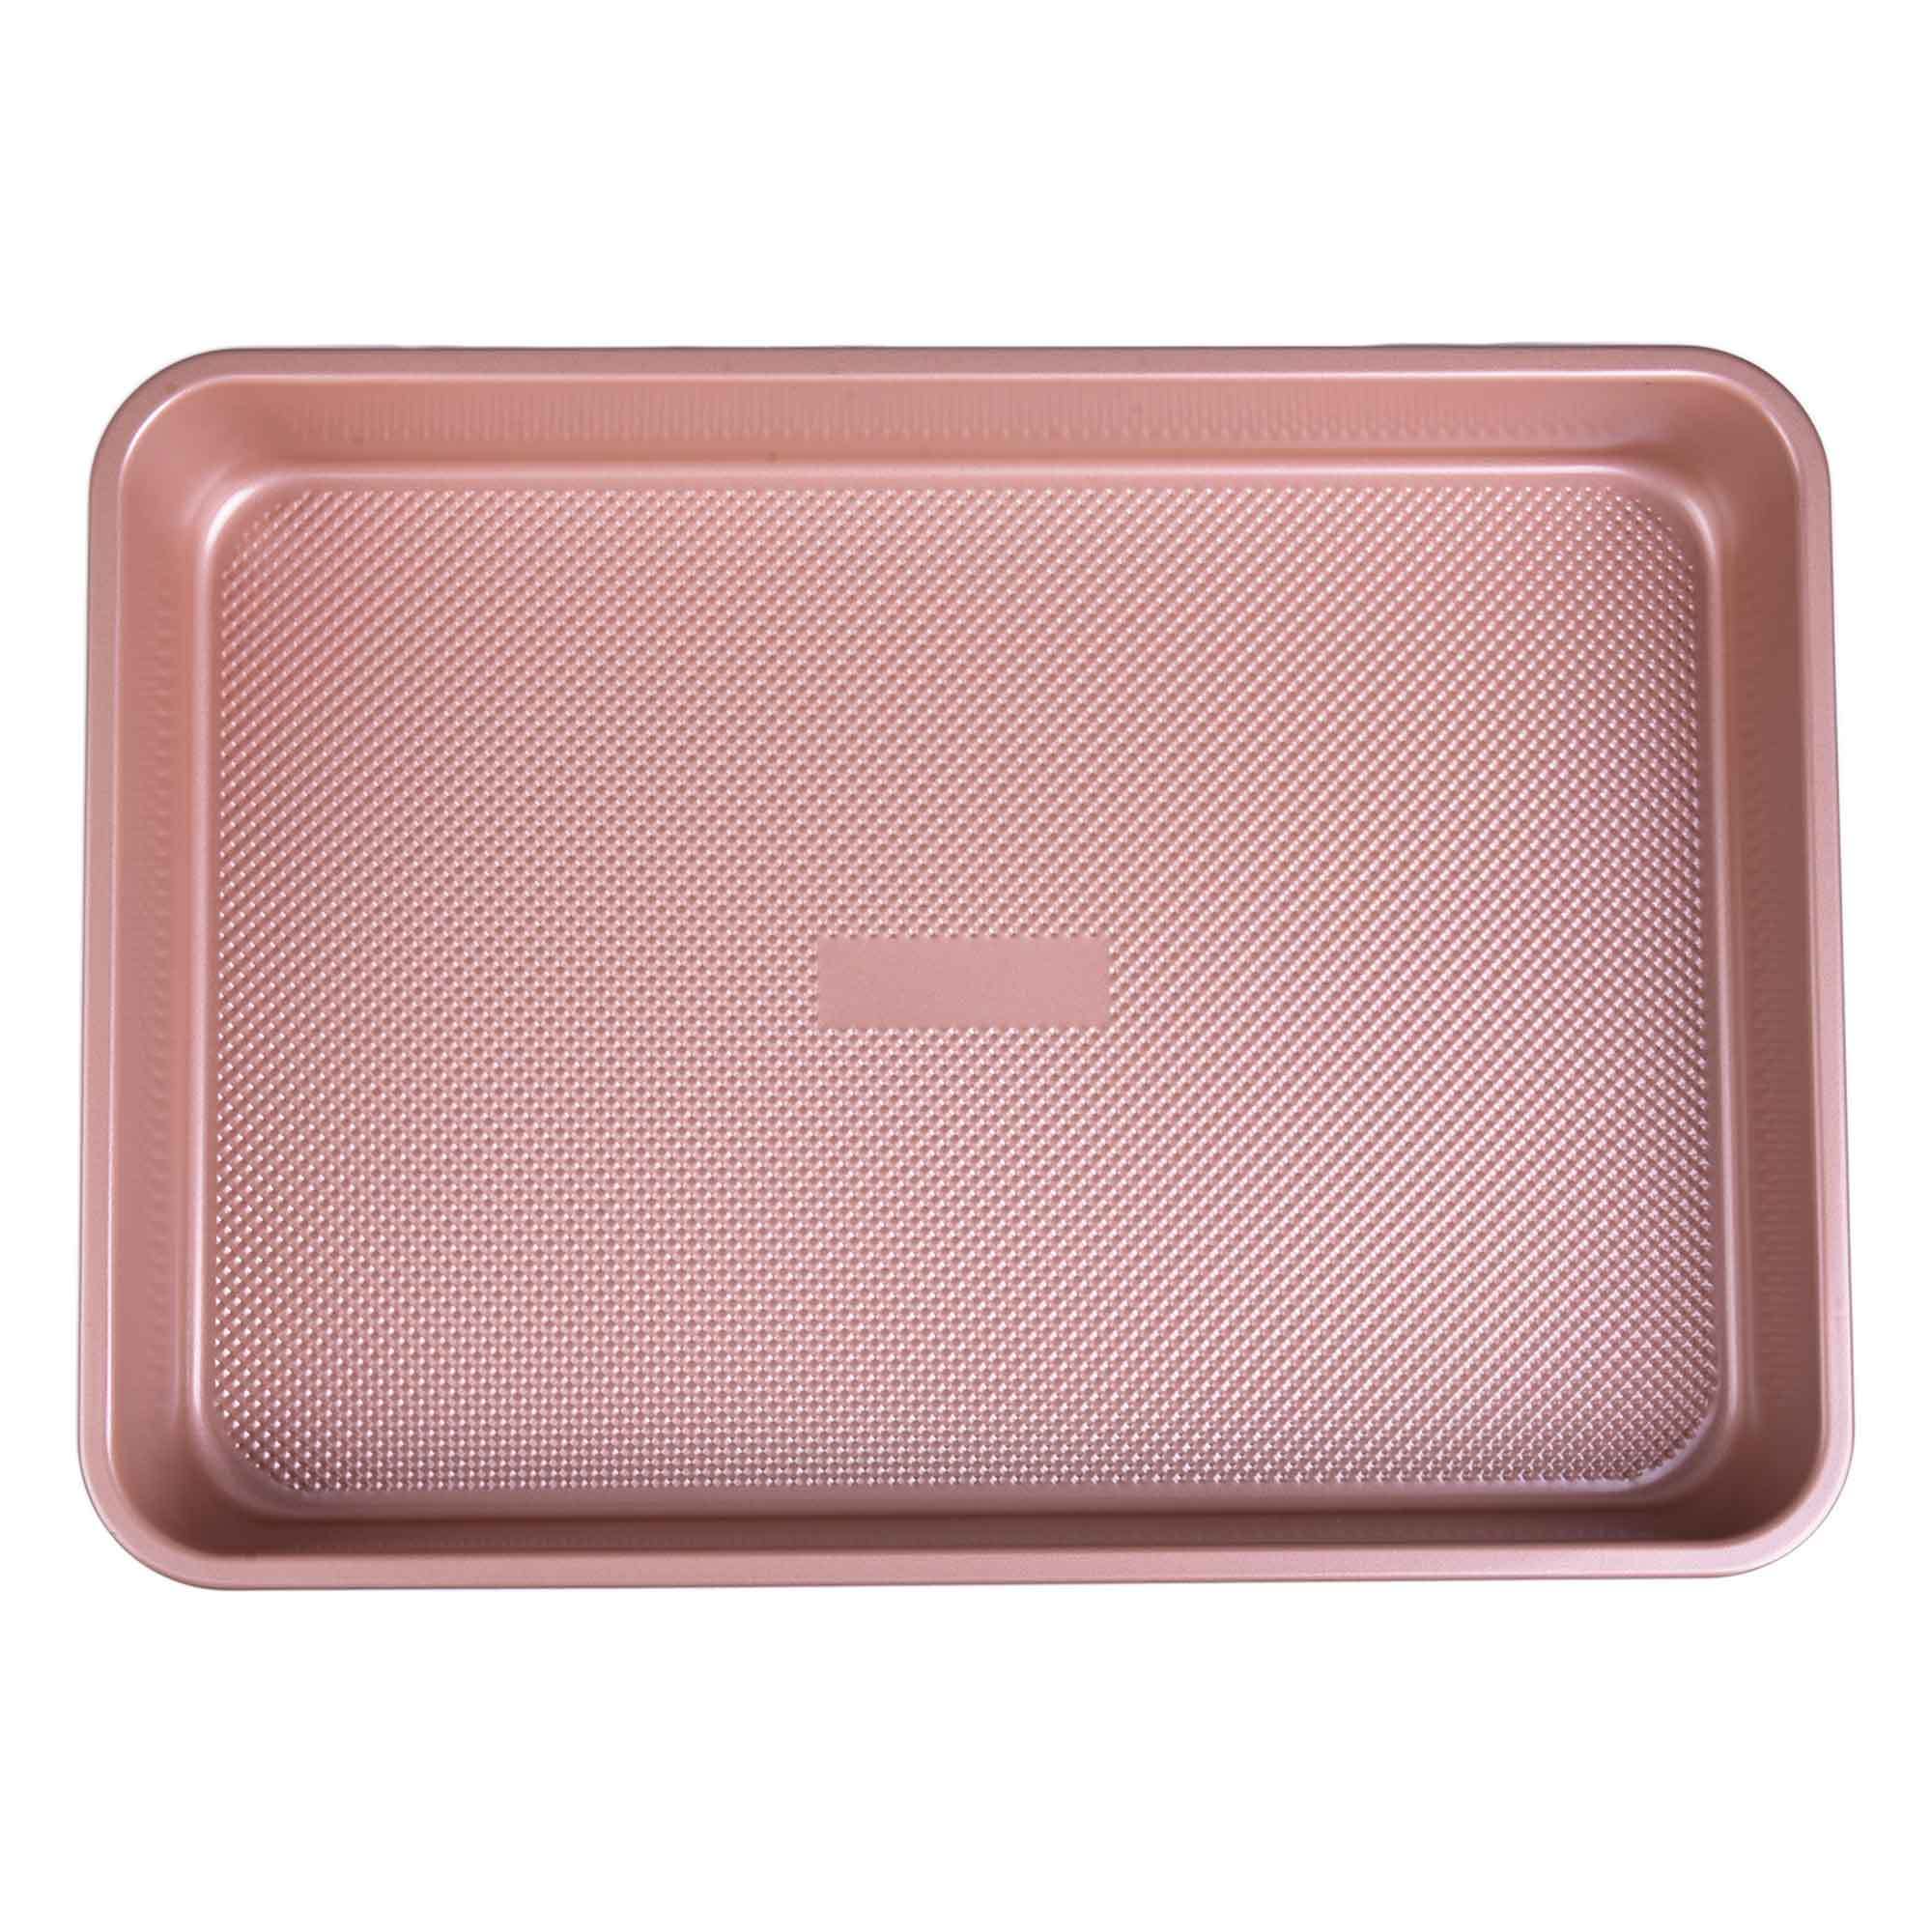 Bakeware Set with Texture Pattern 3232